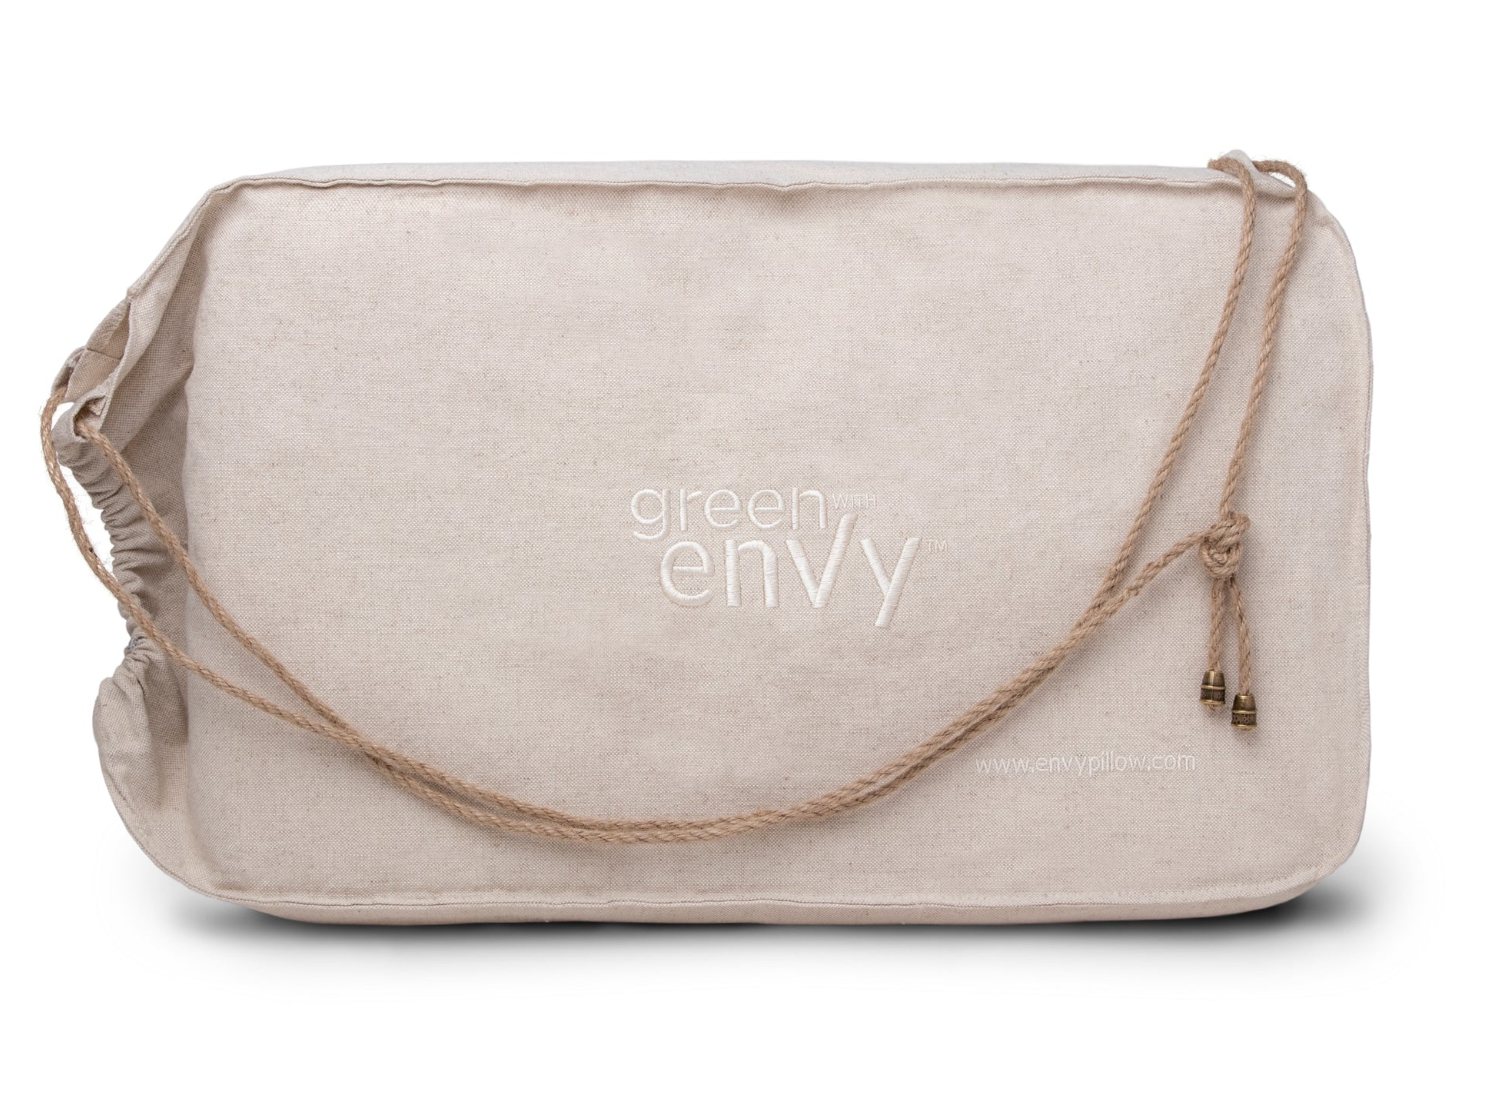 Envy Pillow GREEN with enVy®" 100% Natural Latex Pillow with COPPER-infused TENCE